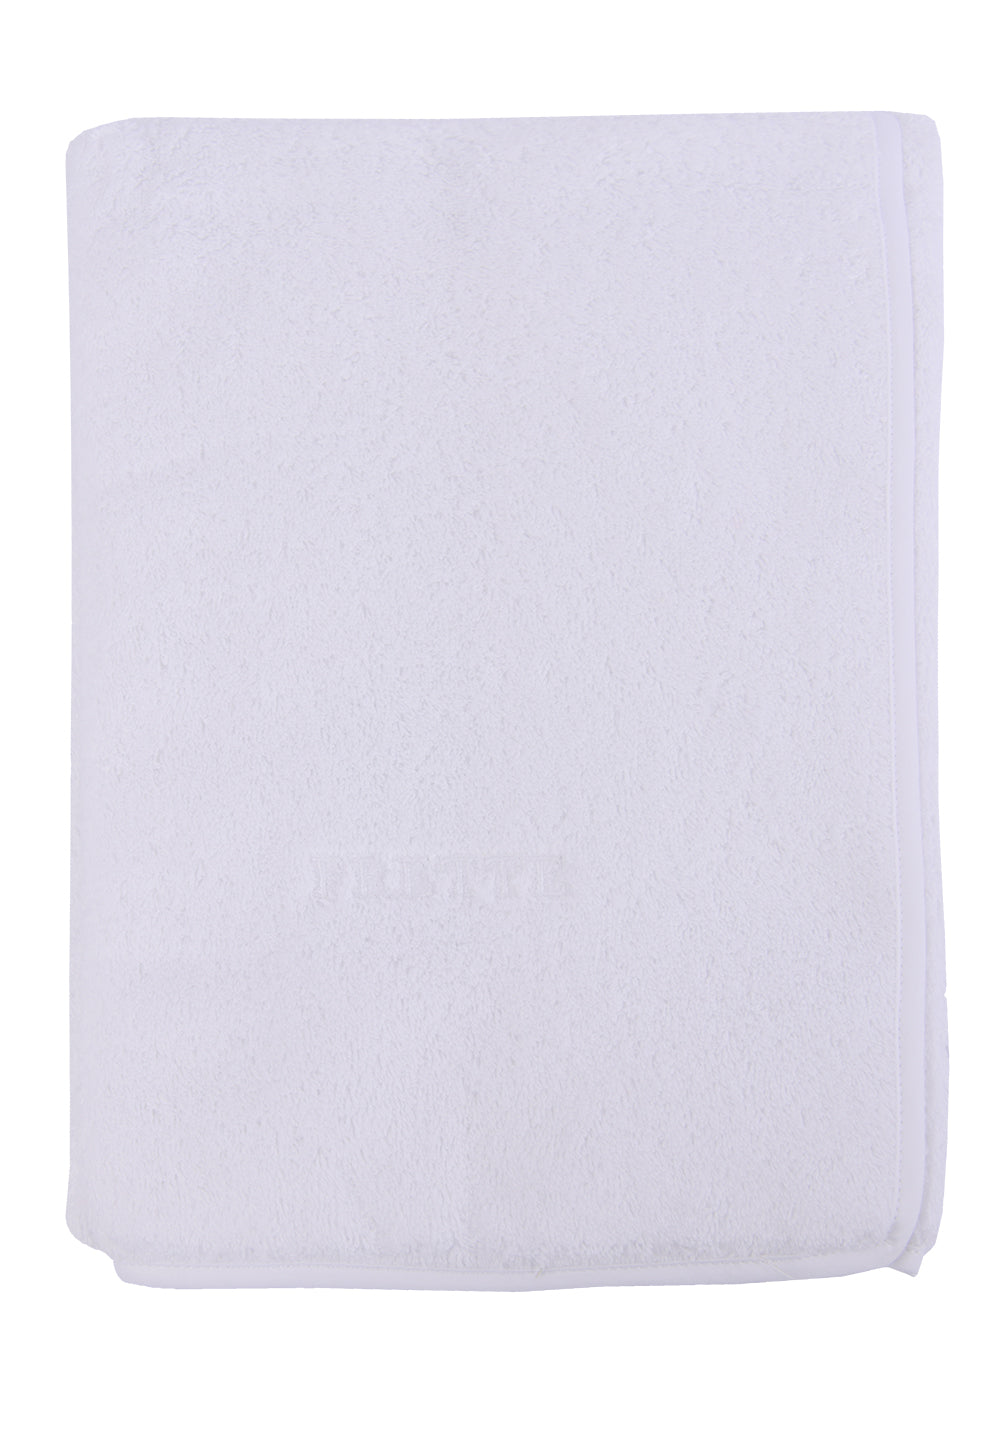 ESSENT.SOLID TOWEL HAND TOWEL 60X110 WHI